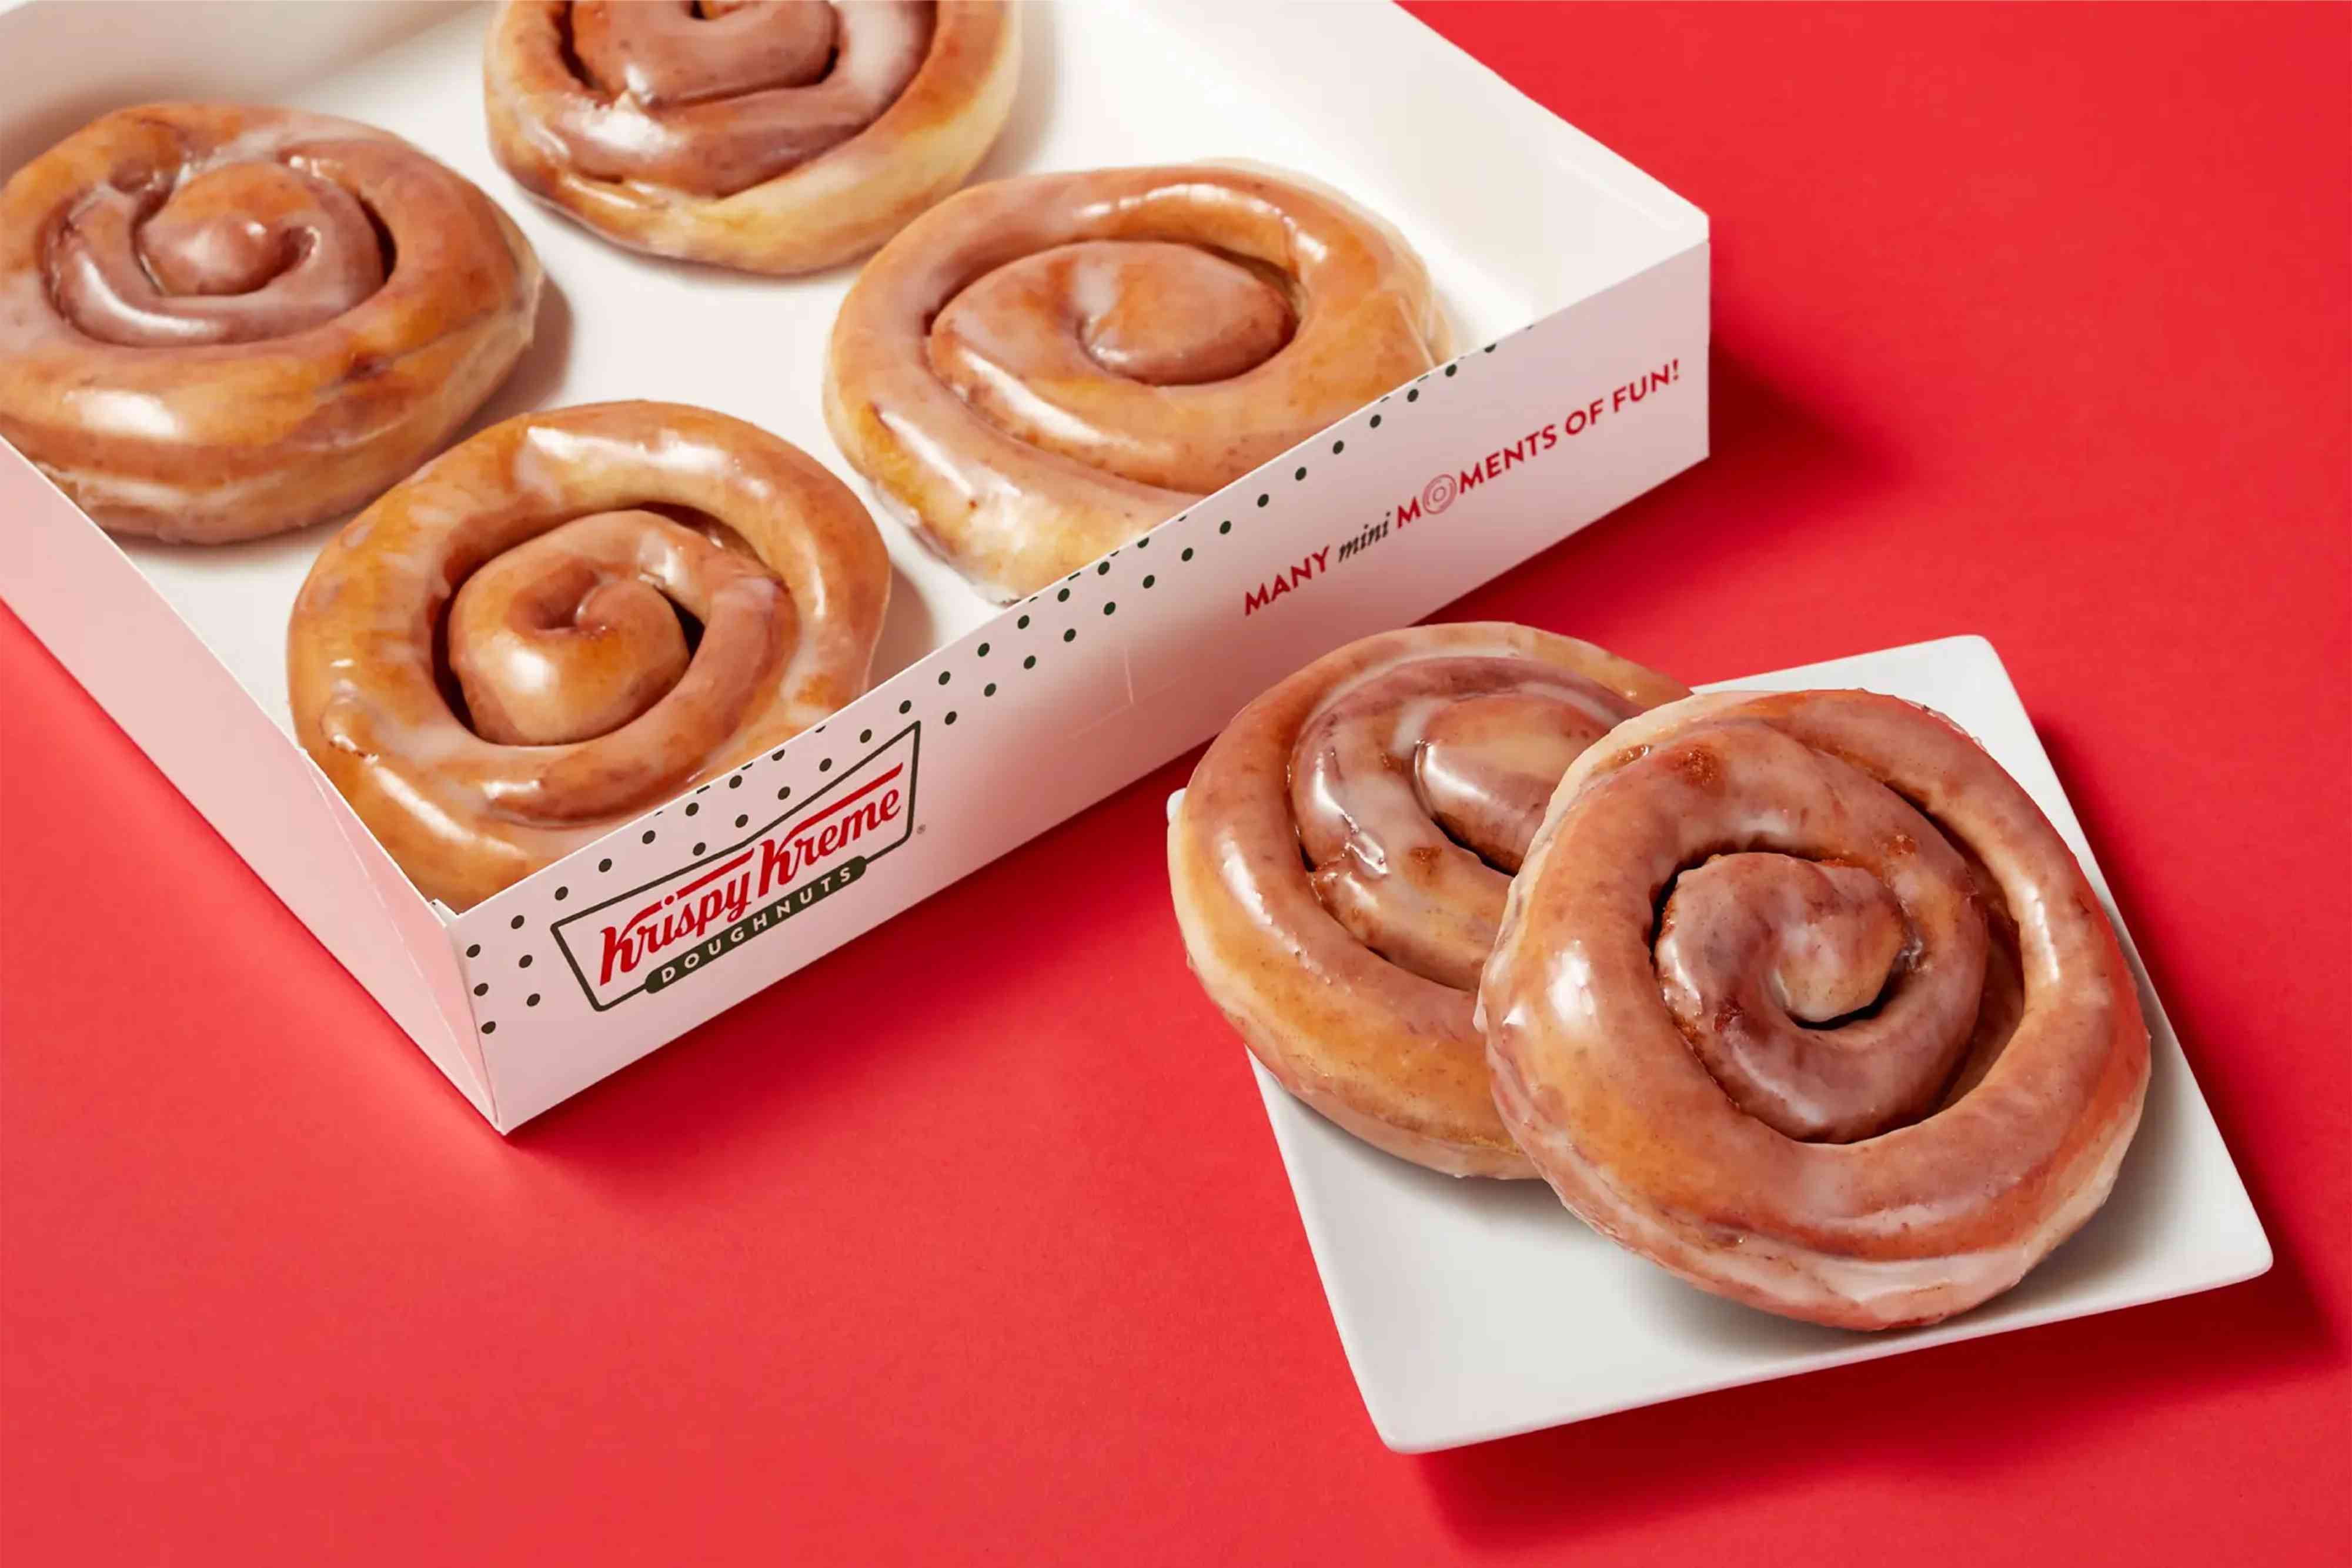 this krispy kreme fan favorite is now available 7 days a week